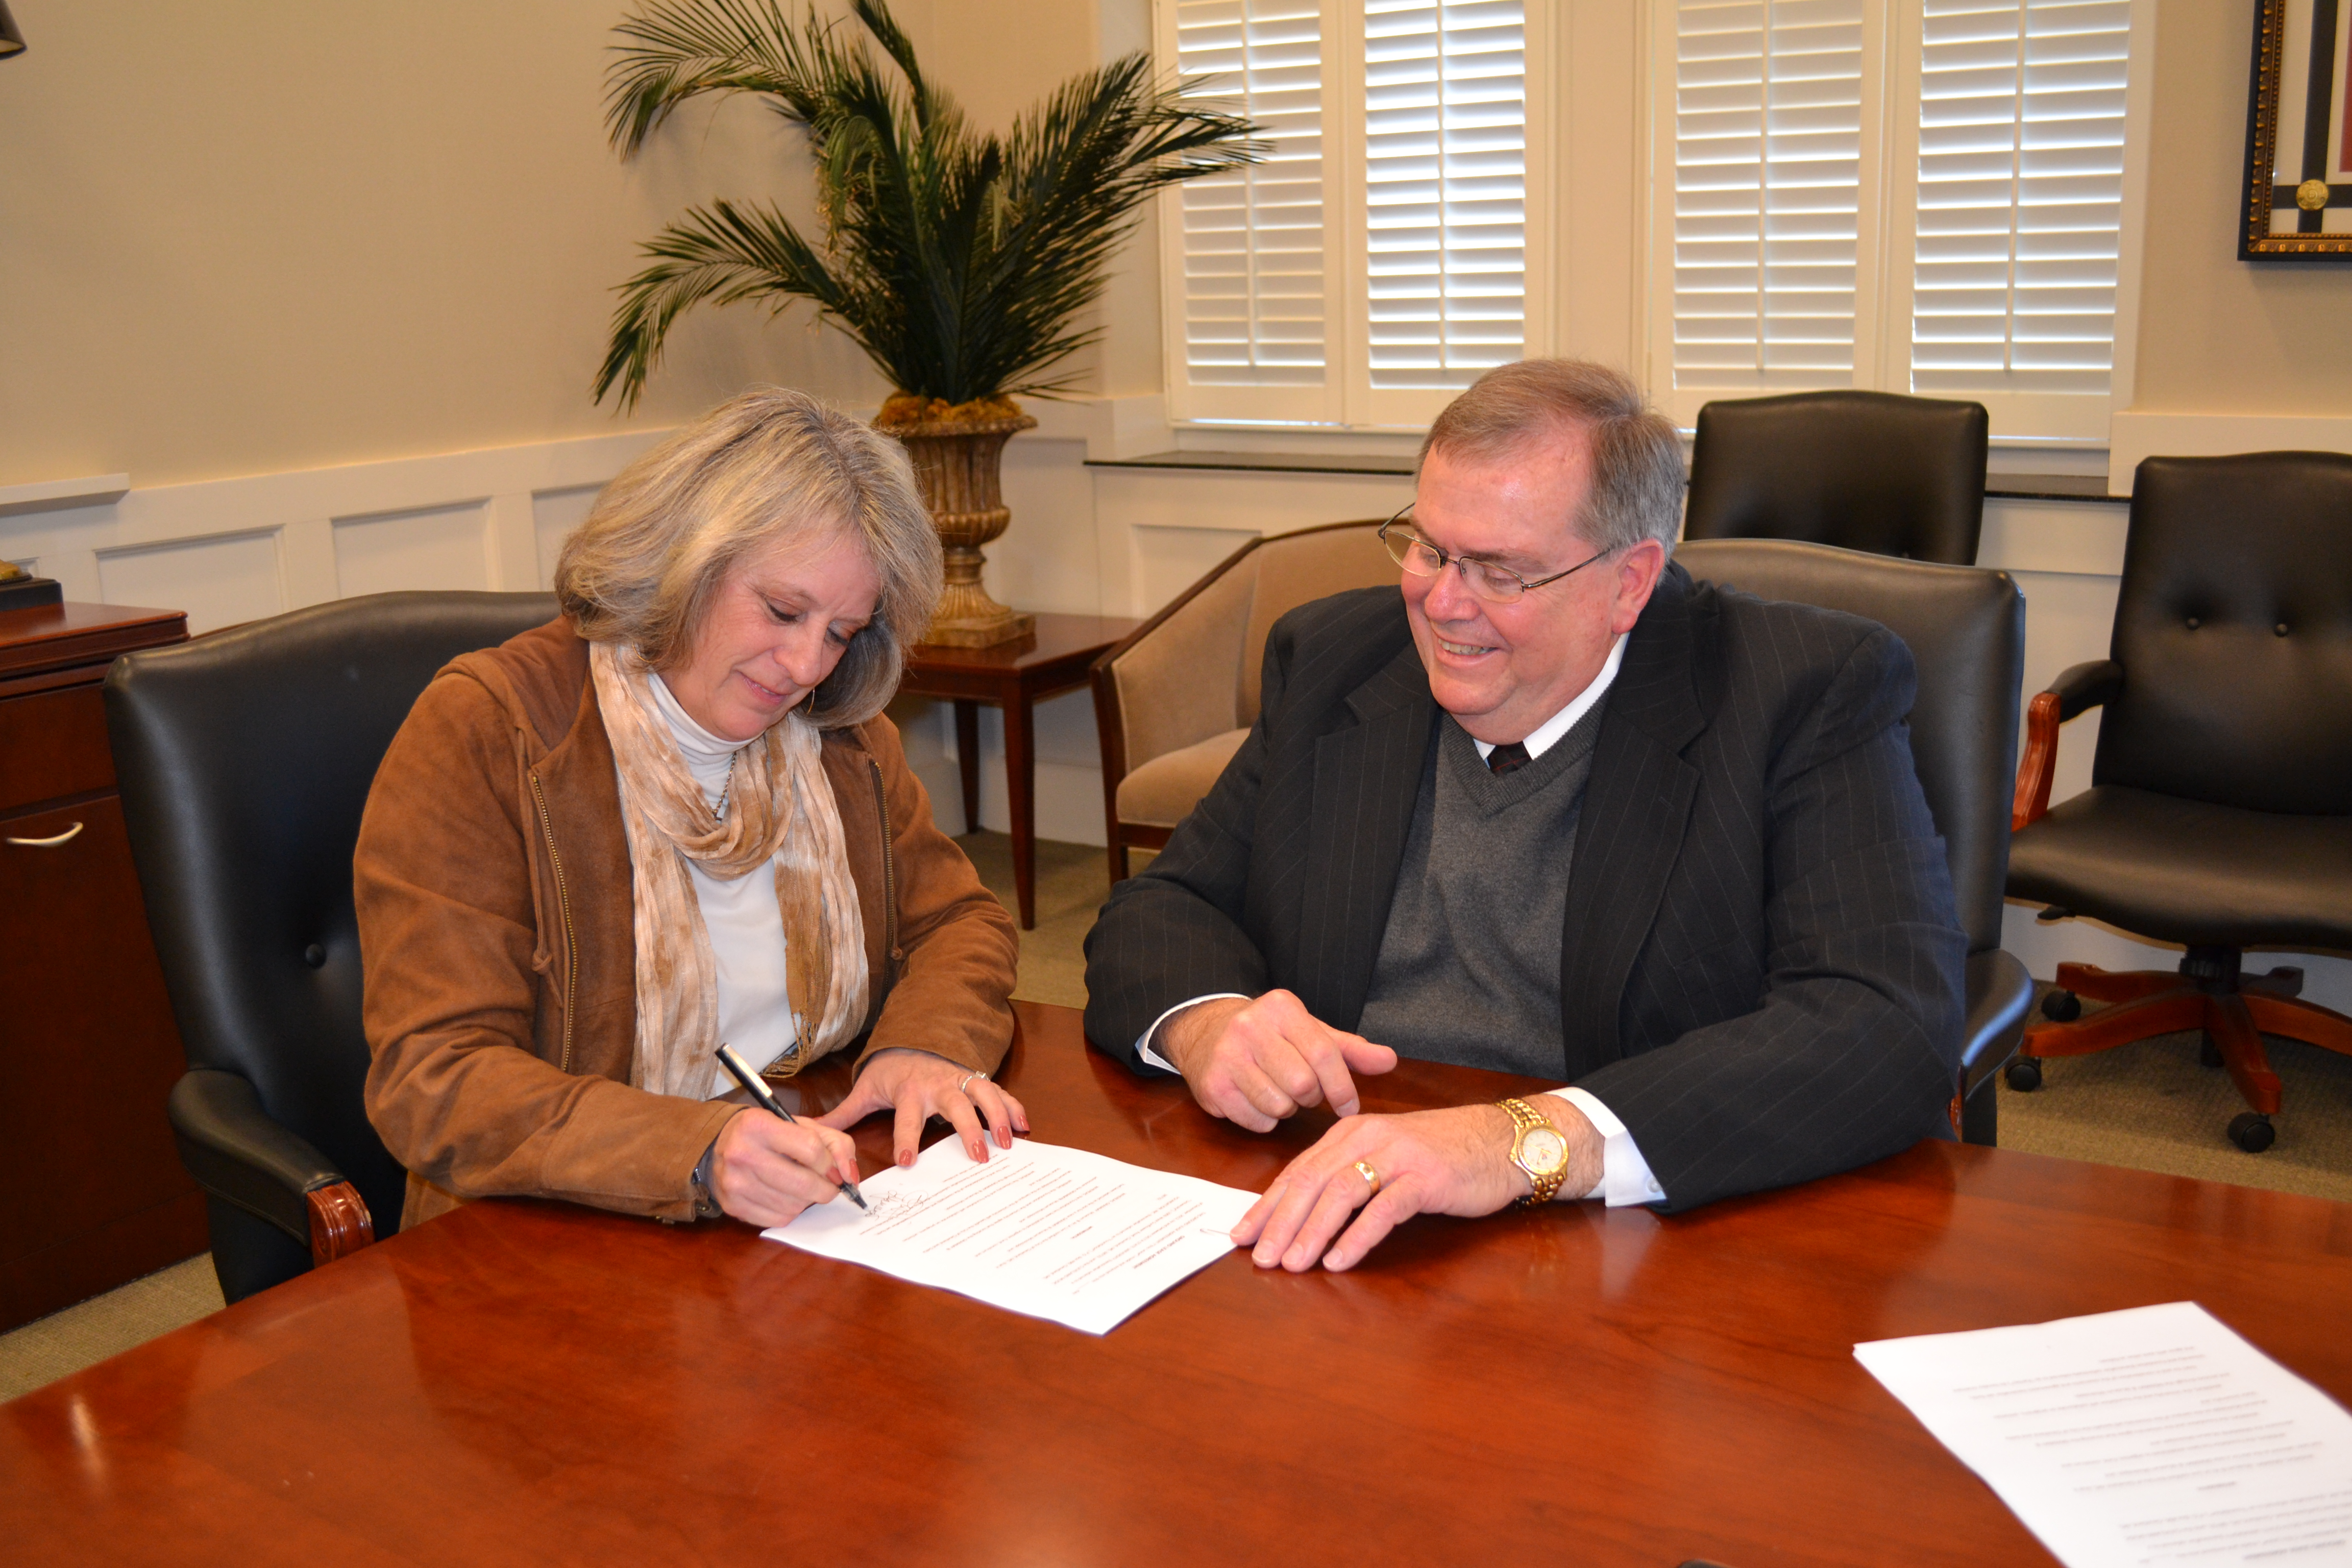 PHOTO:  From left, President of the Cleveland Music Foundation Lucy Janoush and Delta State University President Dr. John M. Hilpert sign the lease agreement for the establishment of GRAMMY® Museum Mississippi to be located on the Delta State University campus in Cleveland. 